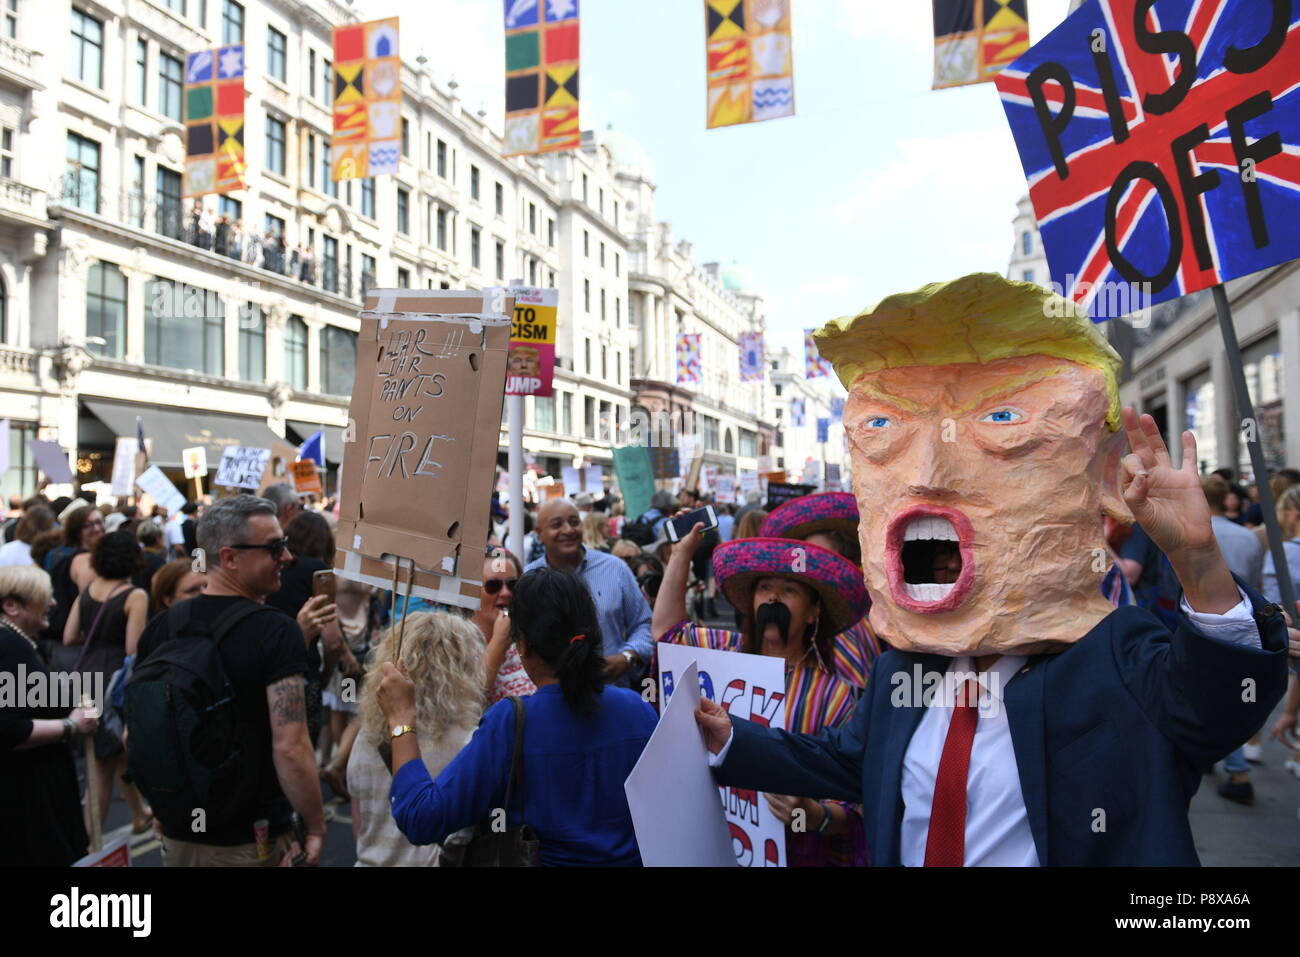 Demonstrators on a 'Stop Trump' march through London, as part of the protests against the visit of US President Donald Trump to the UK. Stock Photo